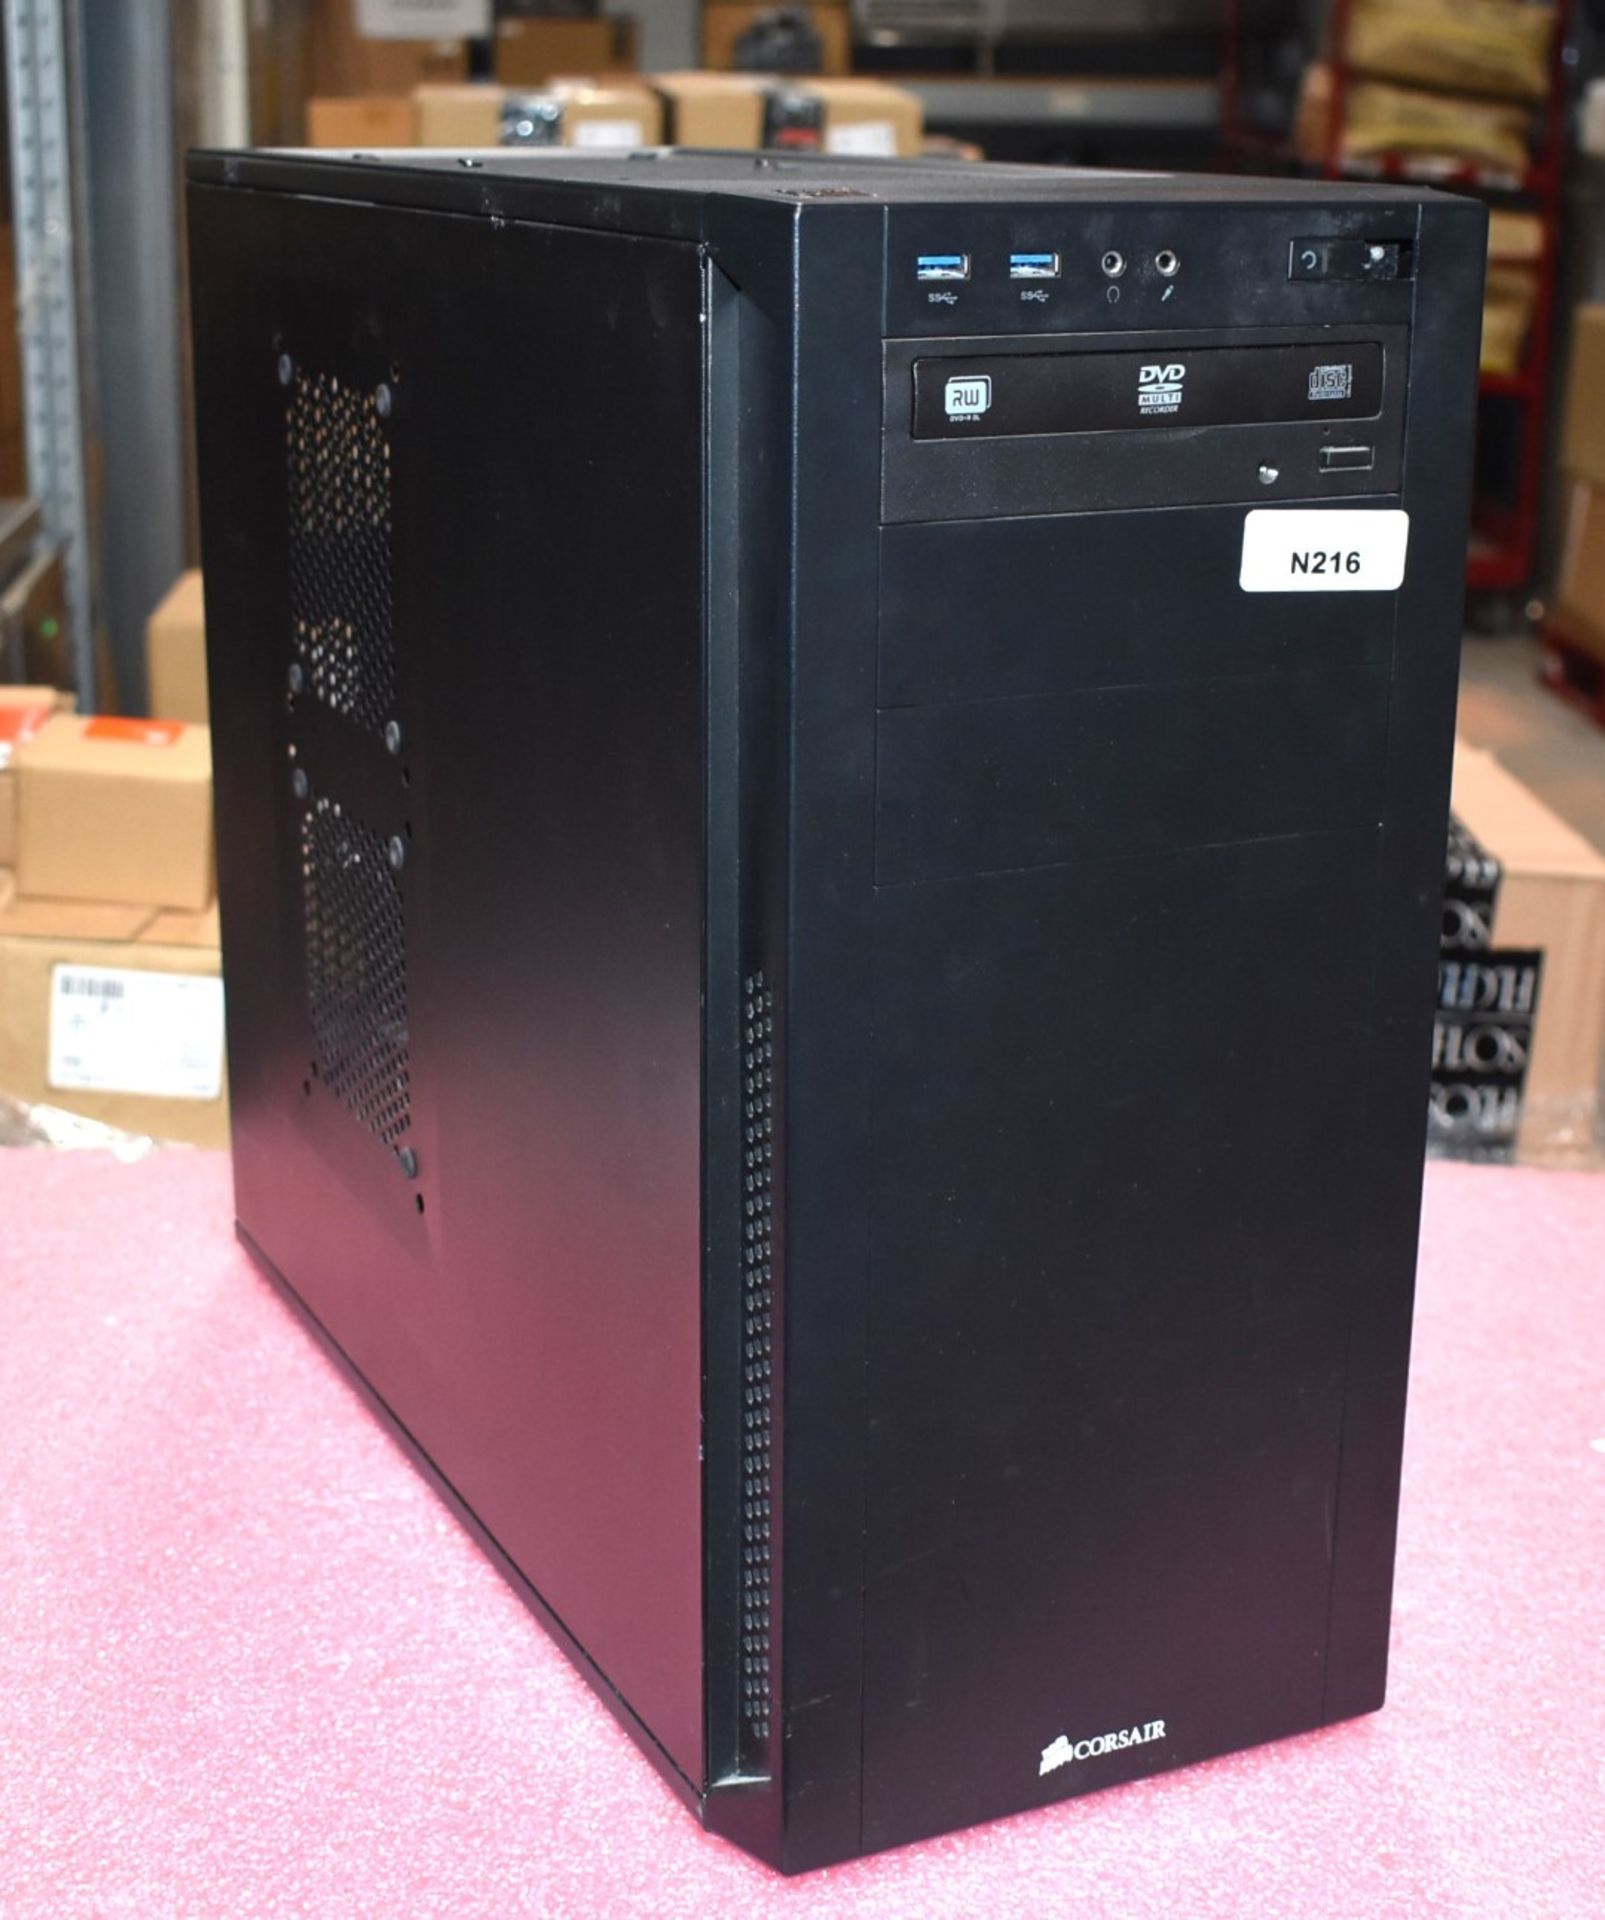 1 x Desktop Gaming PC Featuring an AMD FX6350 Processor, 8GB Ram and a GTX1050ti Graphics Card - Image 2 of 11